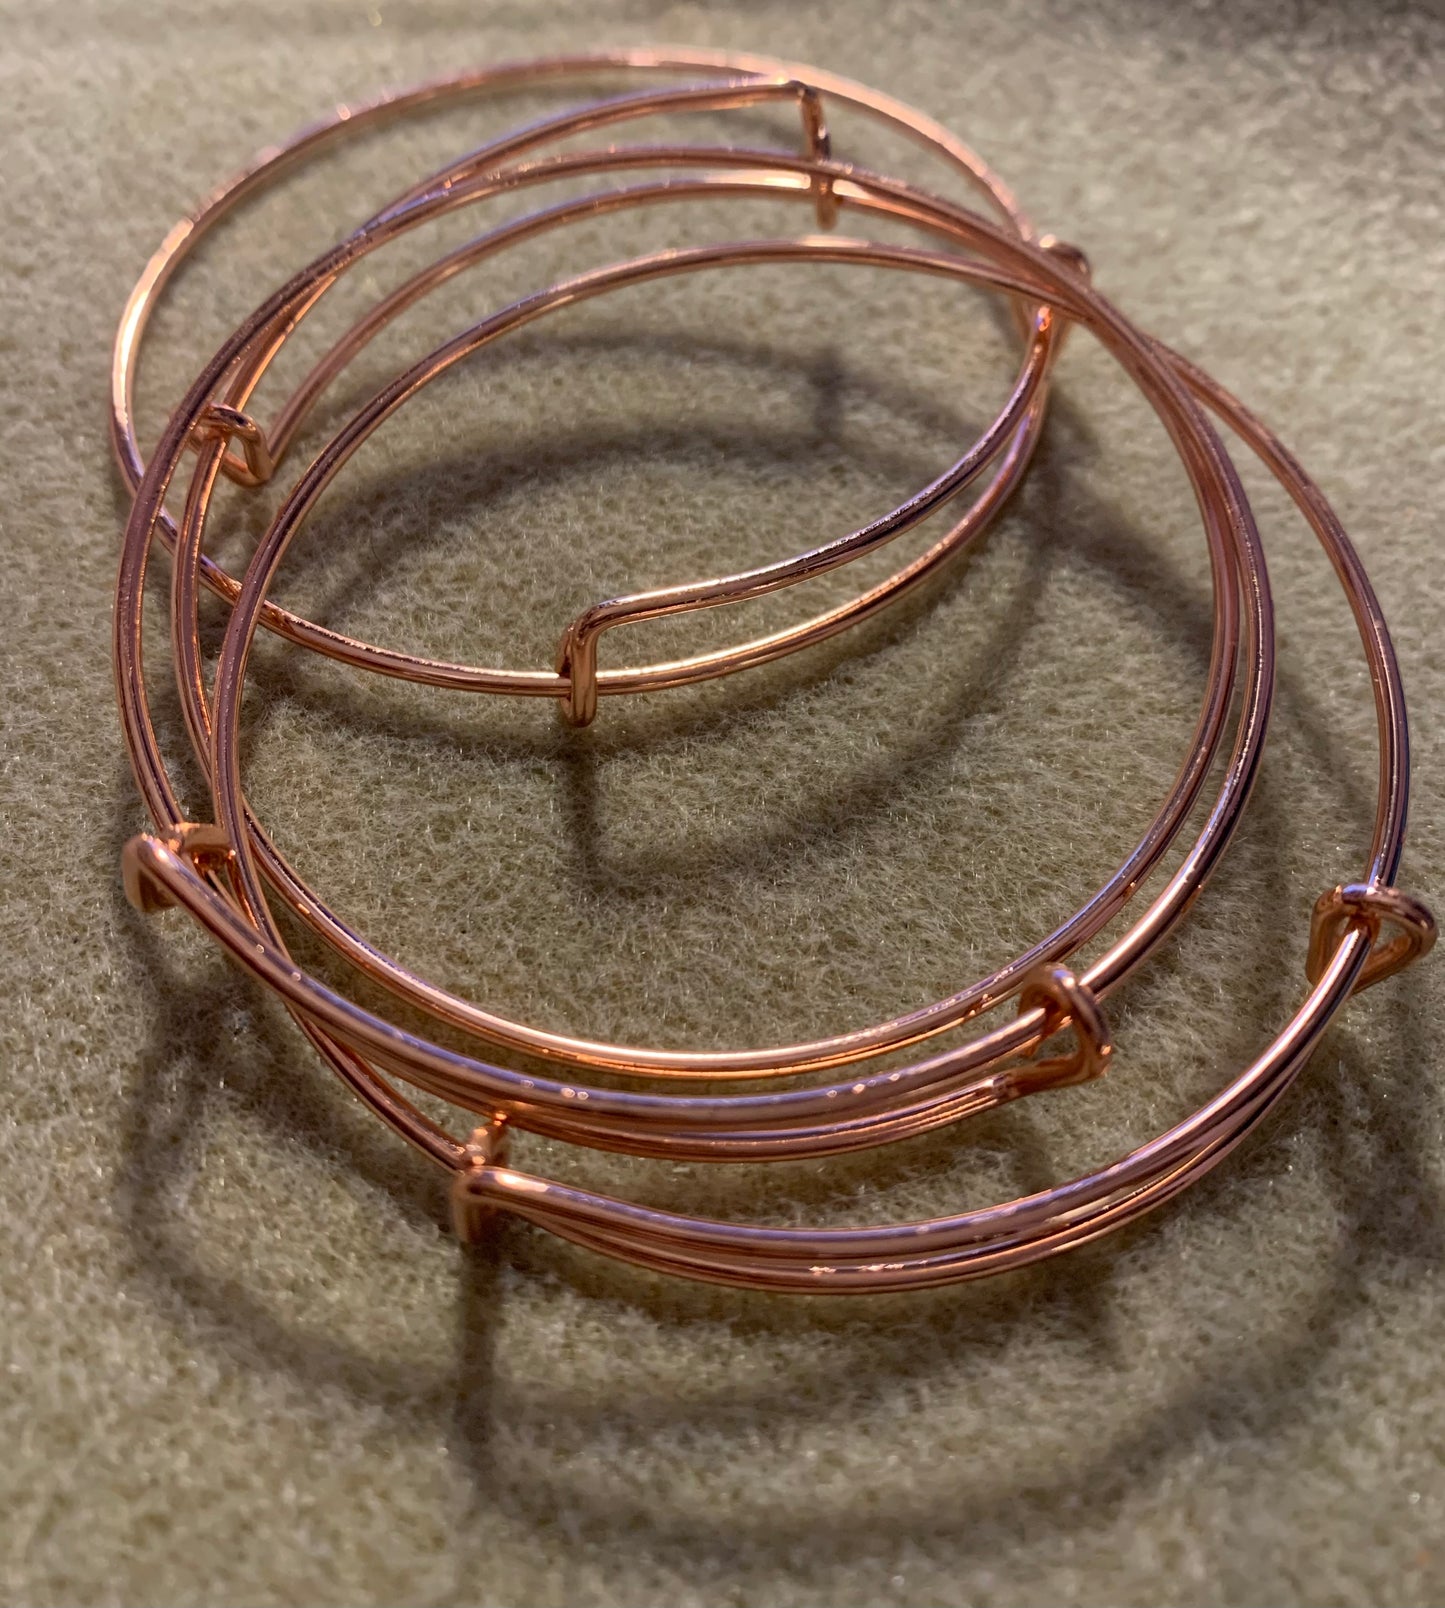 Adjustable Stainless Steel Bangles (5 different colors)